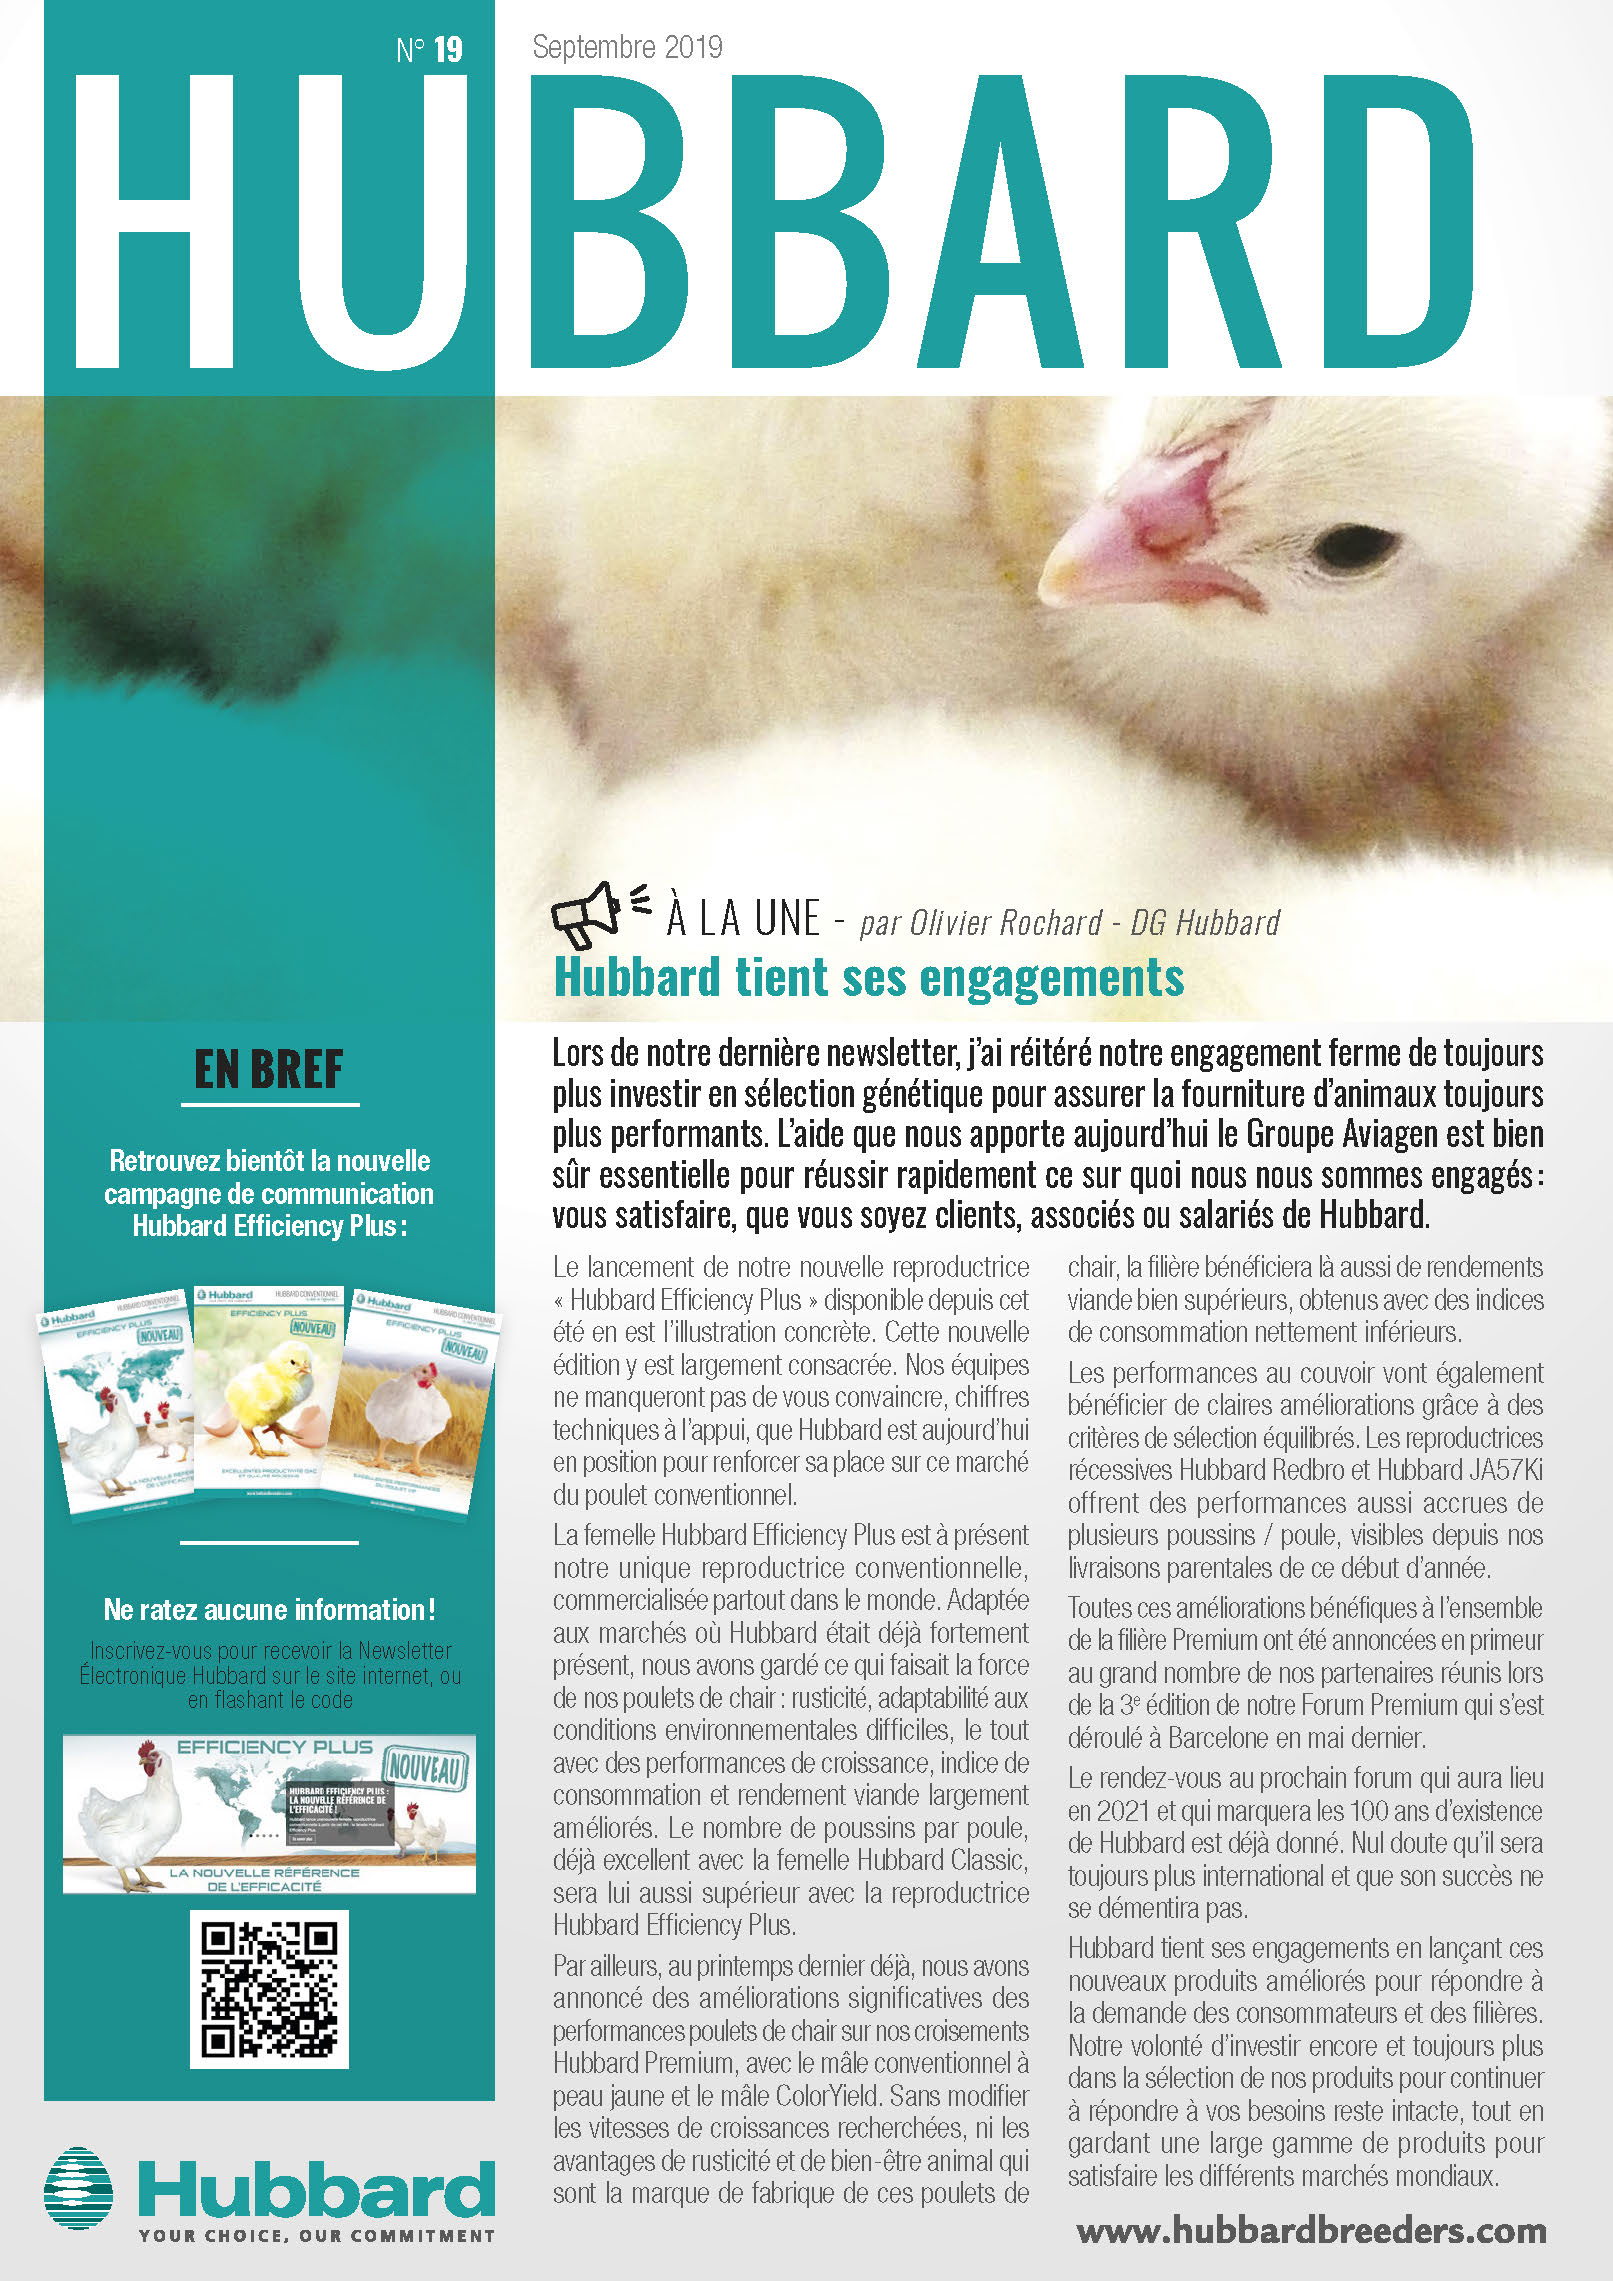 Newsletter edition 19_Septembre 2019 (French)_Page_1